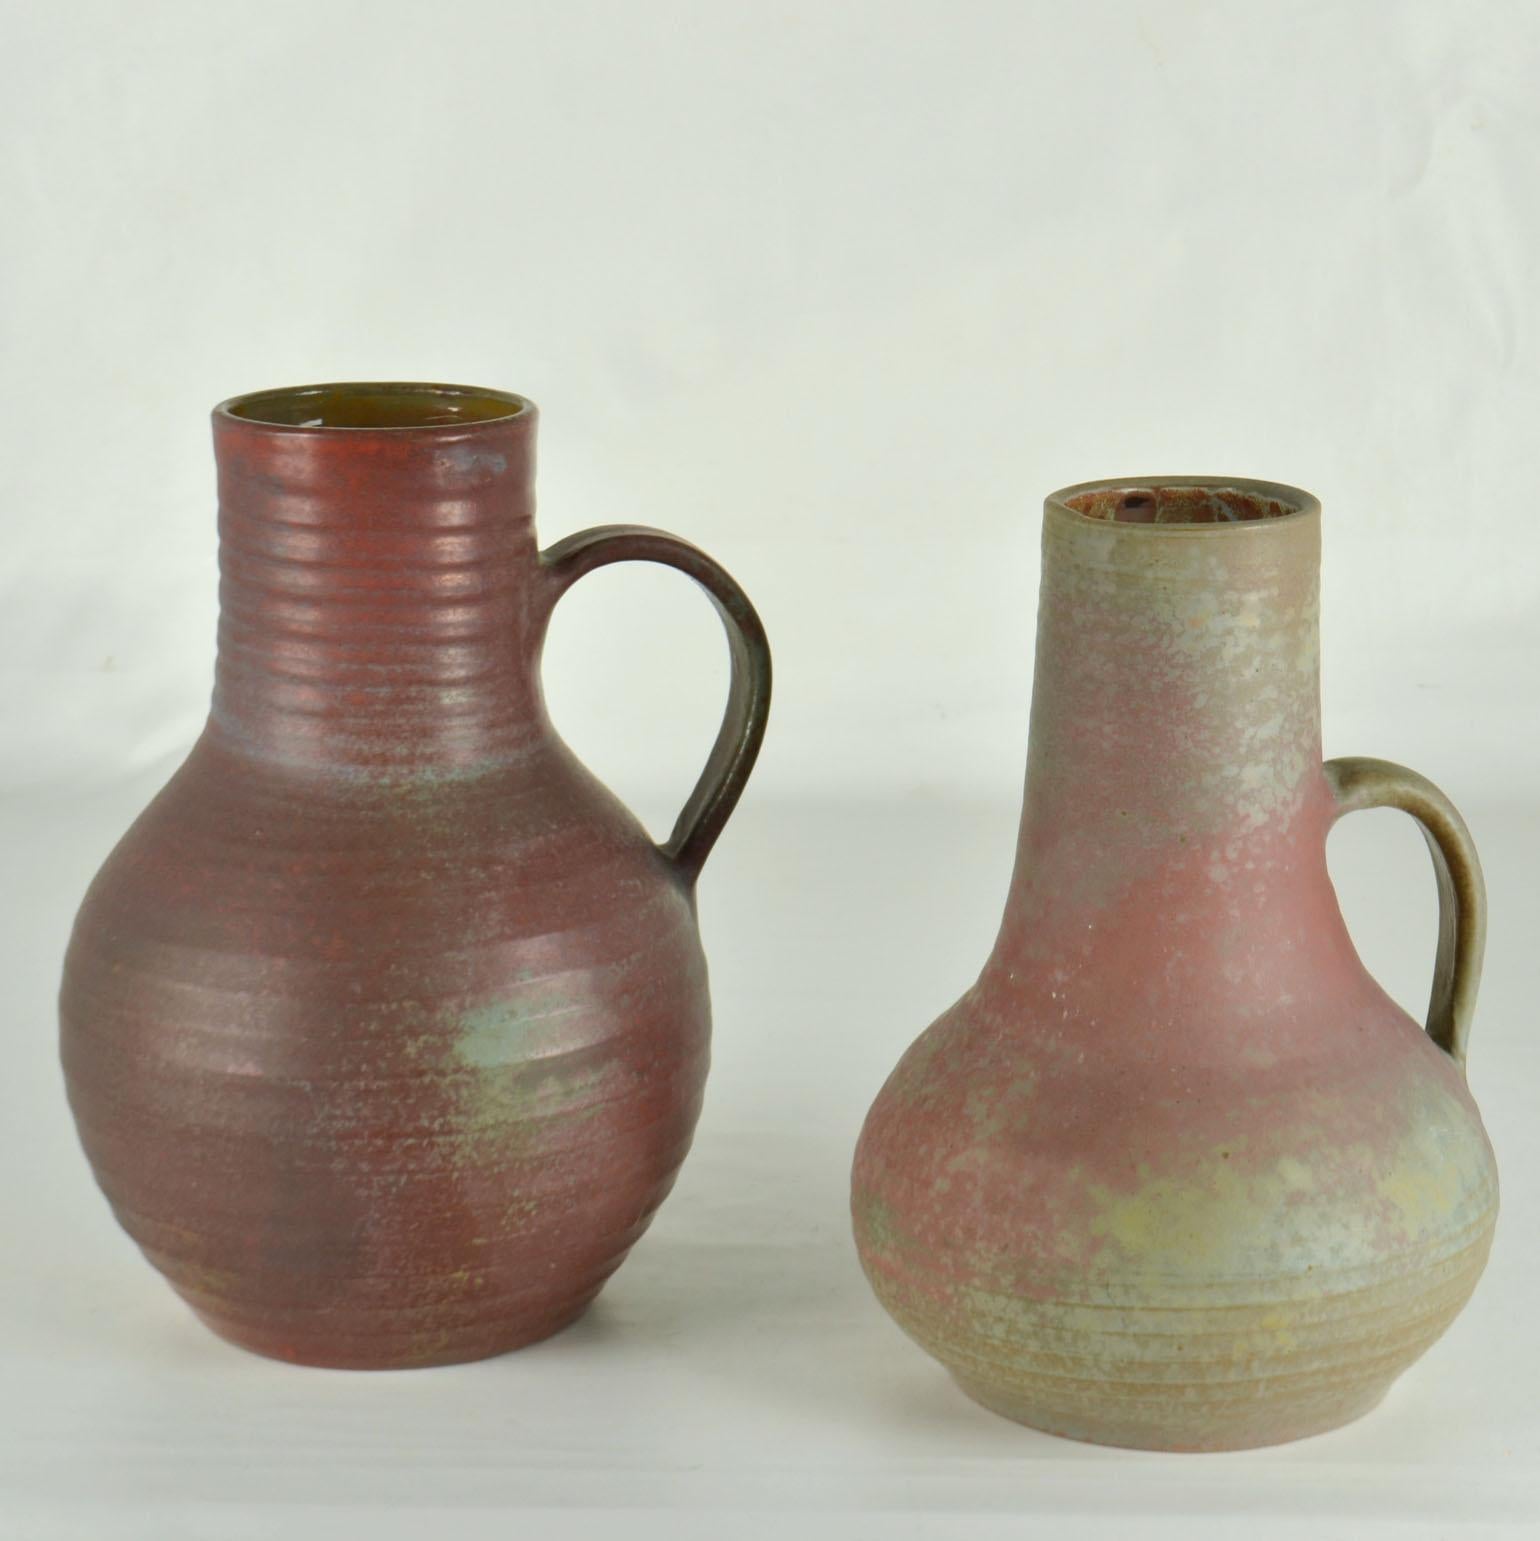 Two hand turned studio pottery tall vases with ears with in earth tone glazes form deep dark red to grey-green. They are created on the turning wheel by highly technical skilled Dutch ceramist in the 1960's at studio DOK. The semi matte glaze and